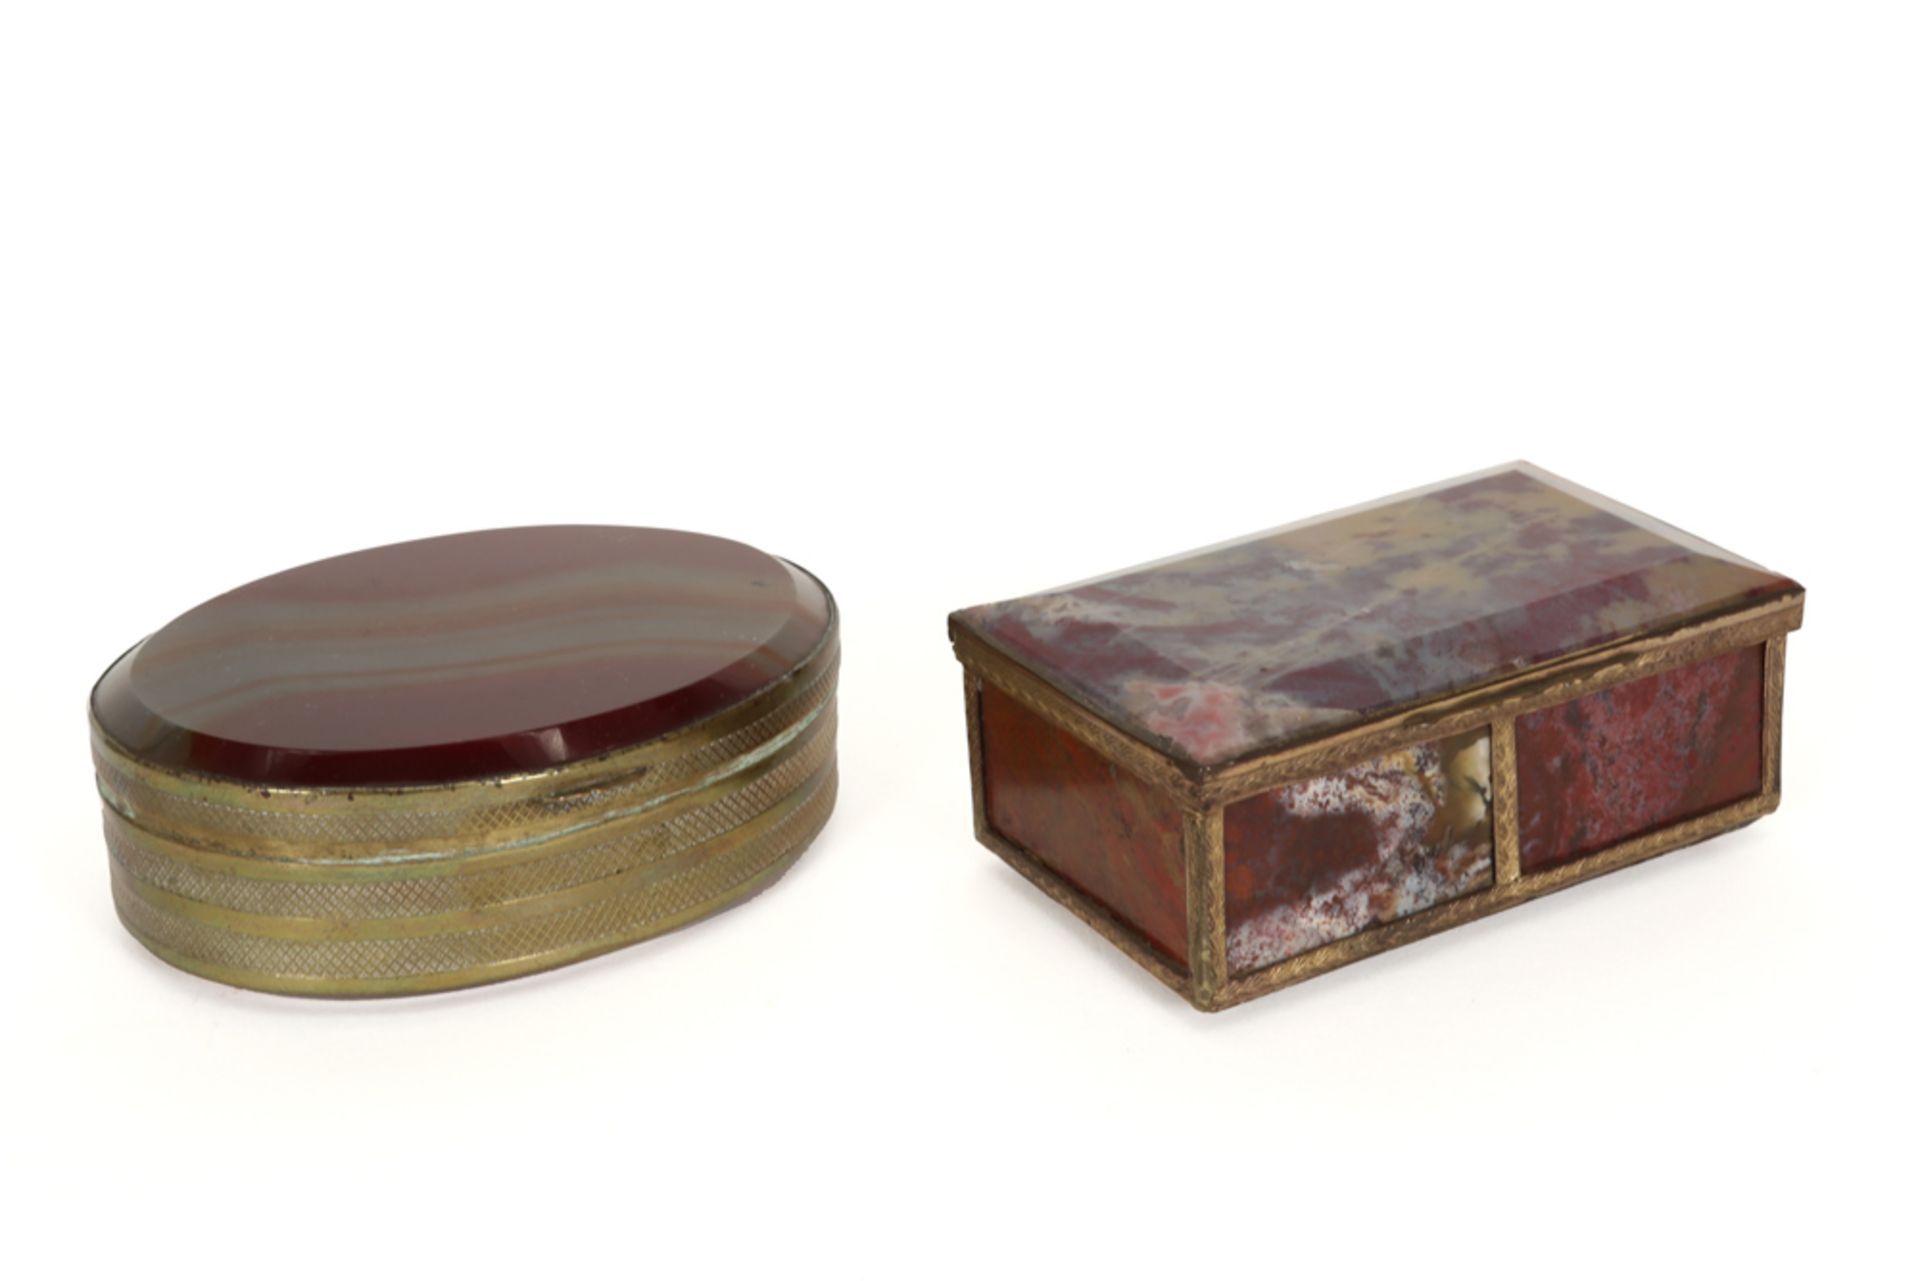 two 19th Cent. snuff boxes in semi-precious stone and gilded metal || Lot (2) van een negentiende